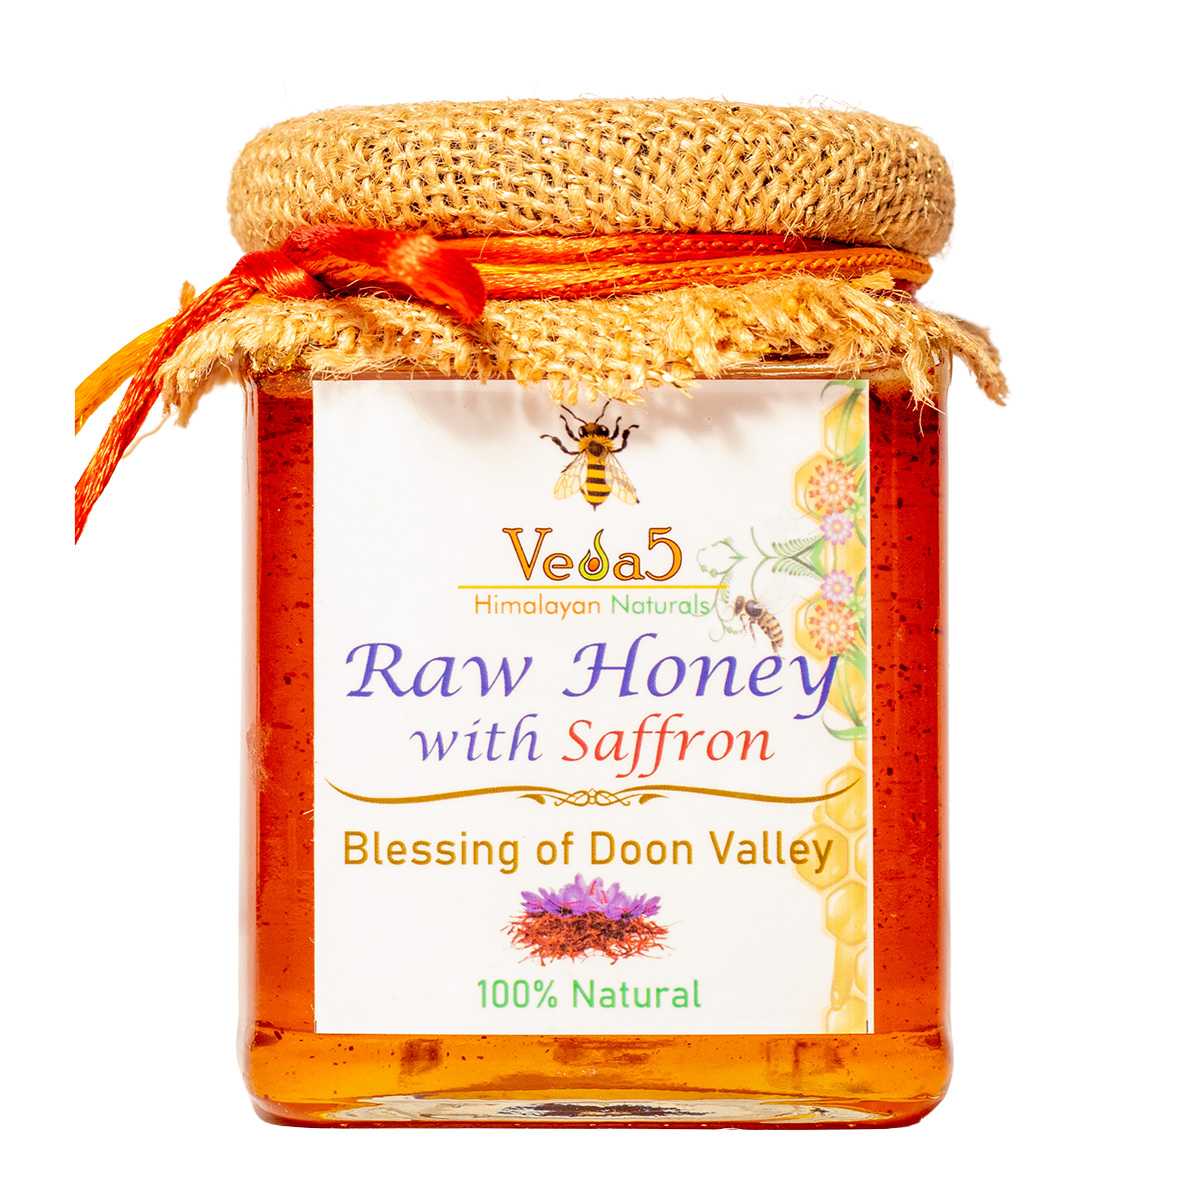 Veda5 Raw Honey with Saffron 100 Natural No Added Sugar Blessings of Doon Valley 300gm Frontside